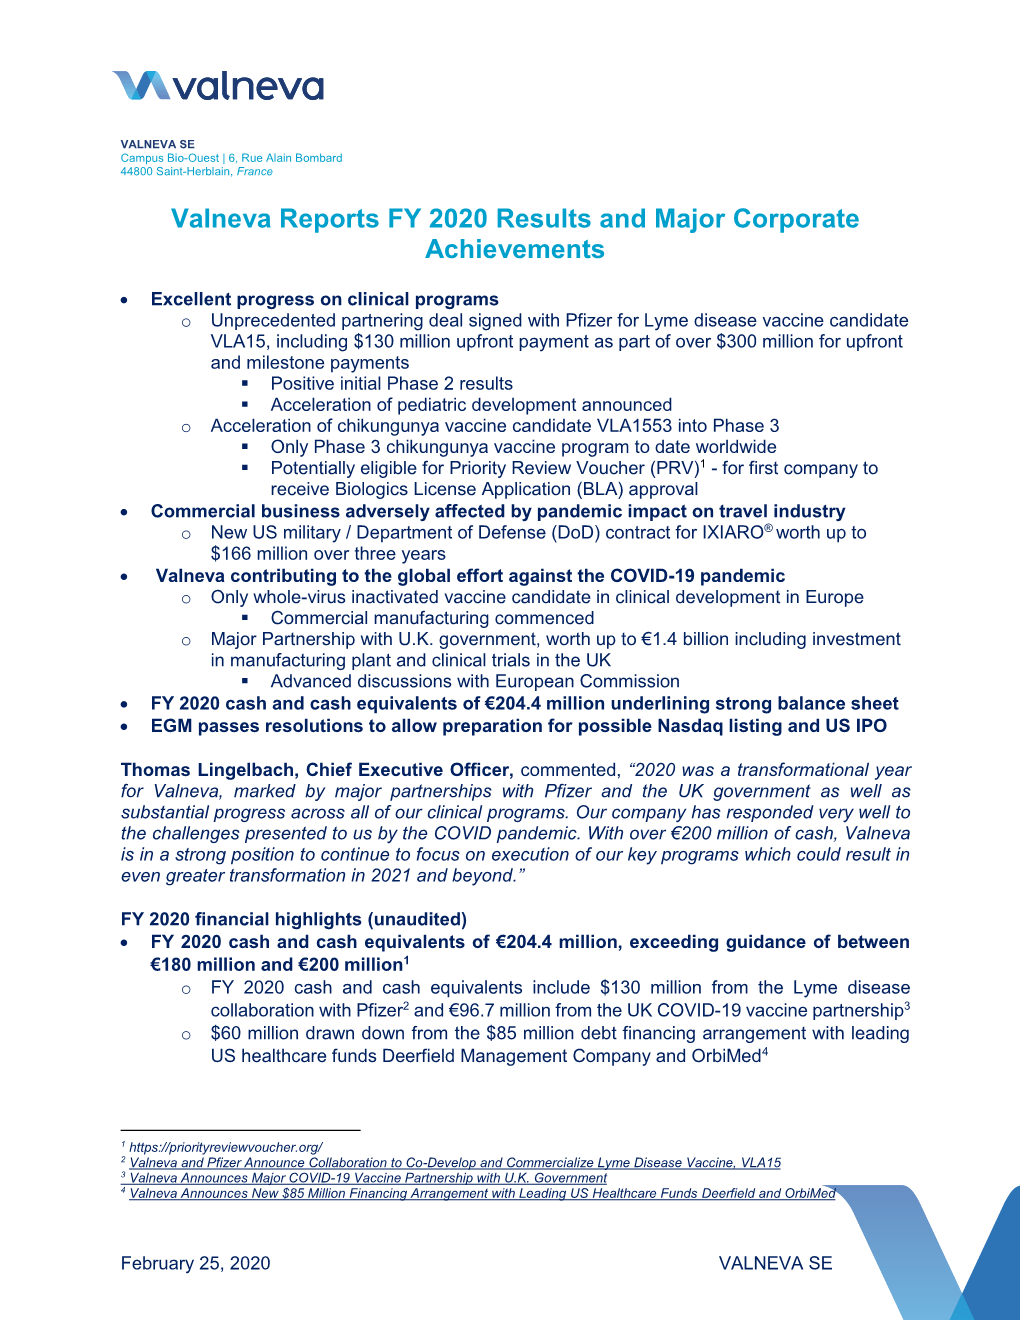 Valneva Reports FY 2020 Results and Major Corporate Achievements